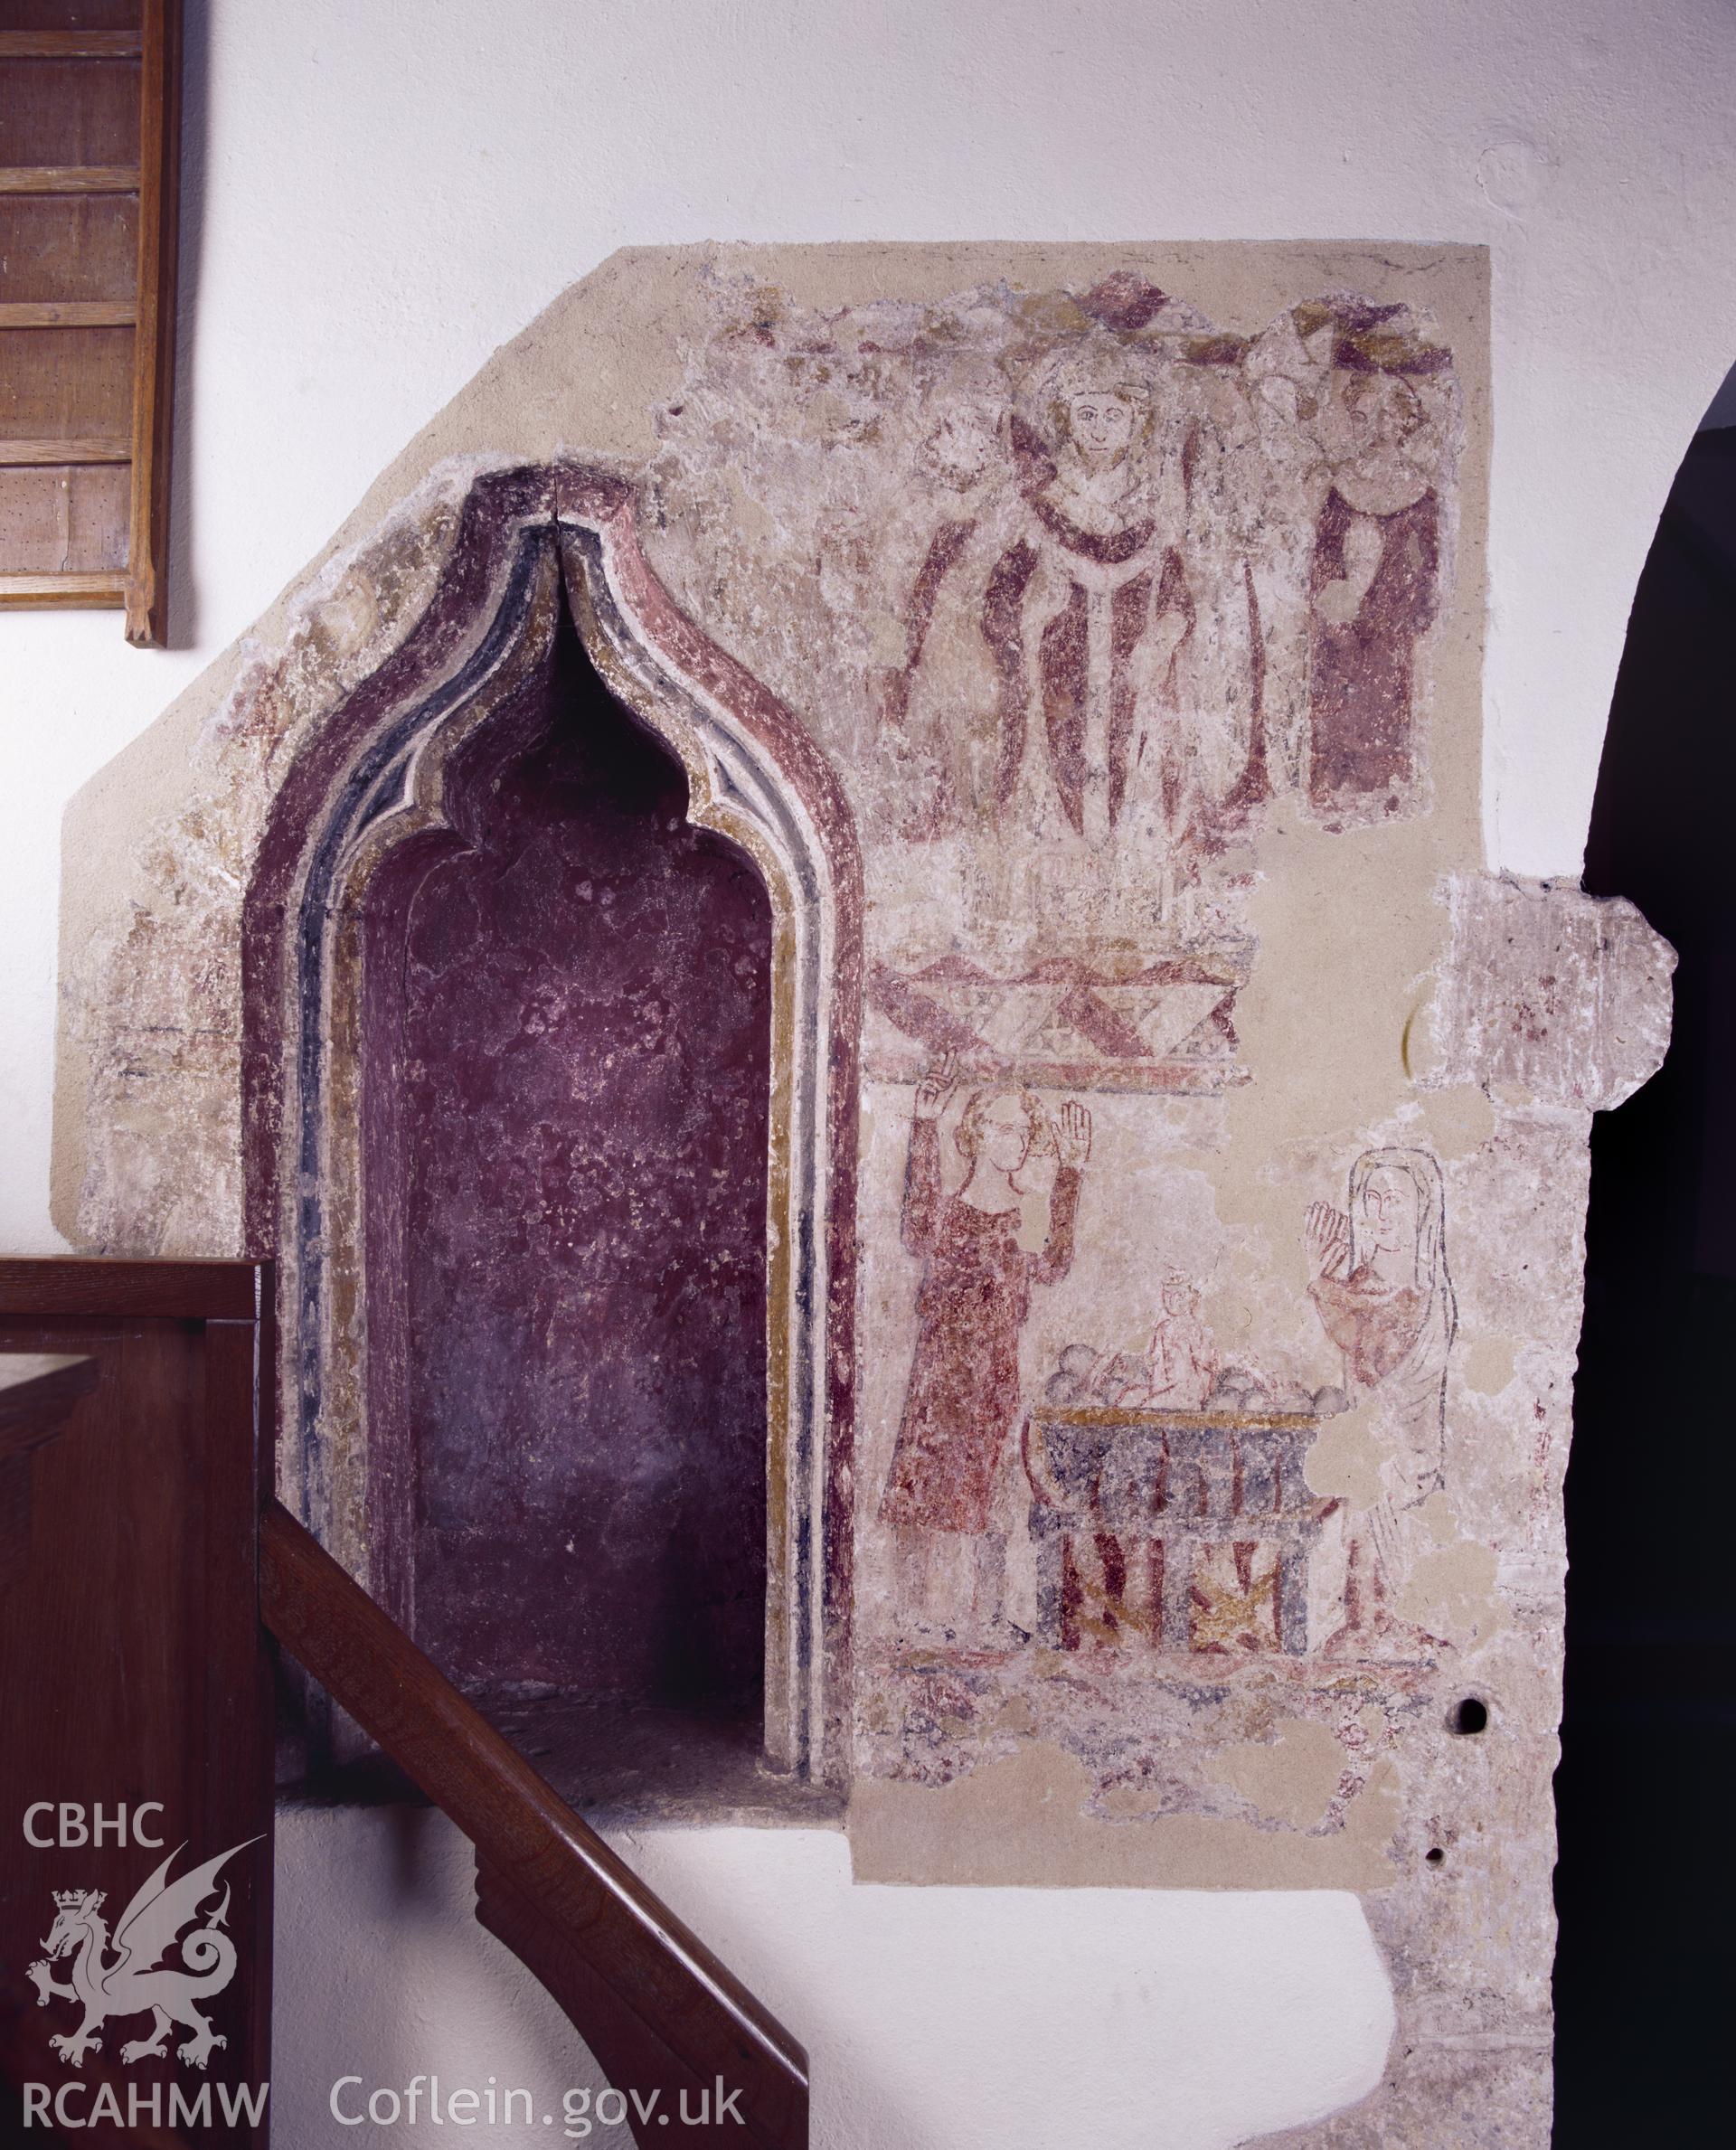 RCAHMW colour transparency showing a wallpainting at Colwinston Church, depicting a scene from the life of St Nicholas.